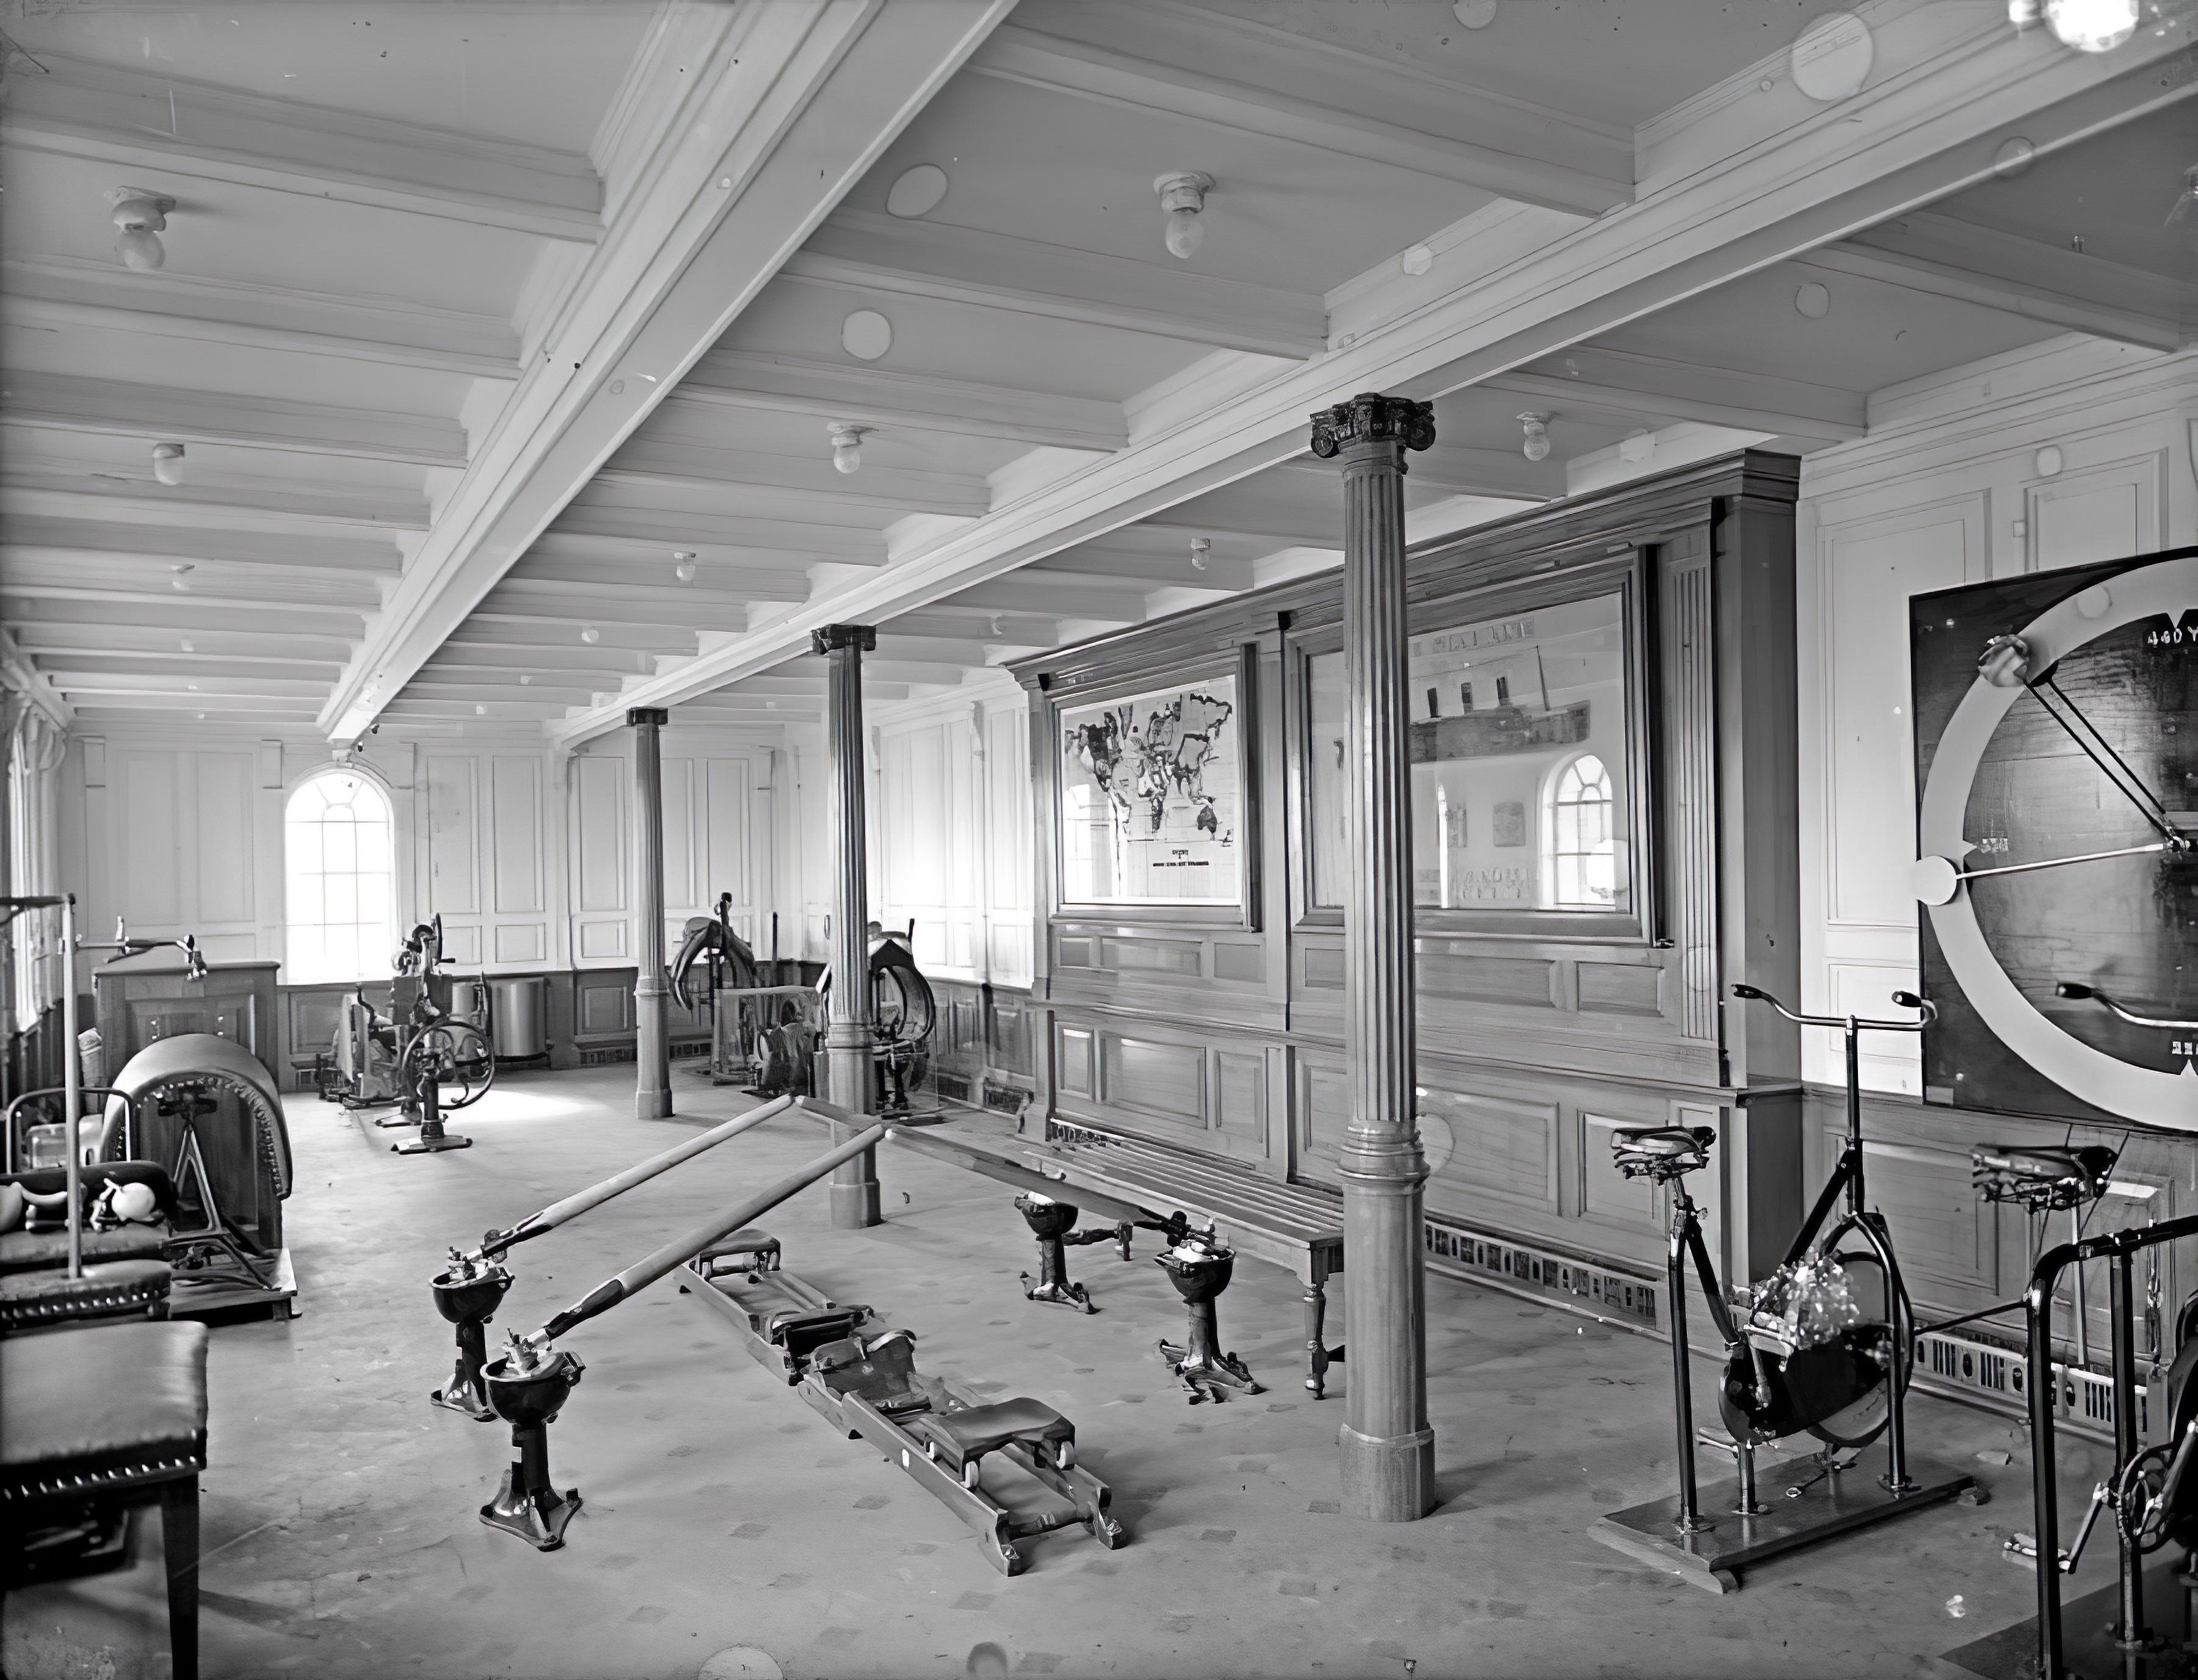 A room with wood paneling, some stationary bikes and what looks like a rowing machine